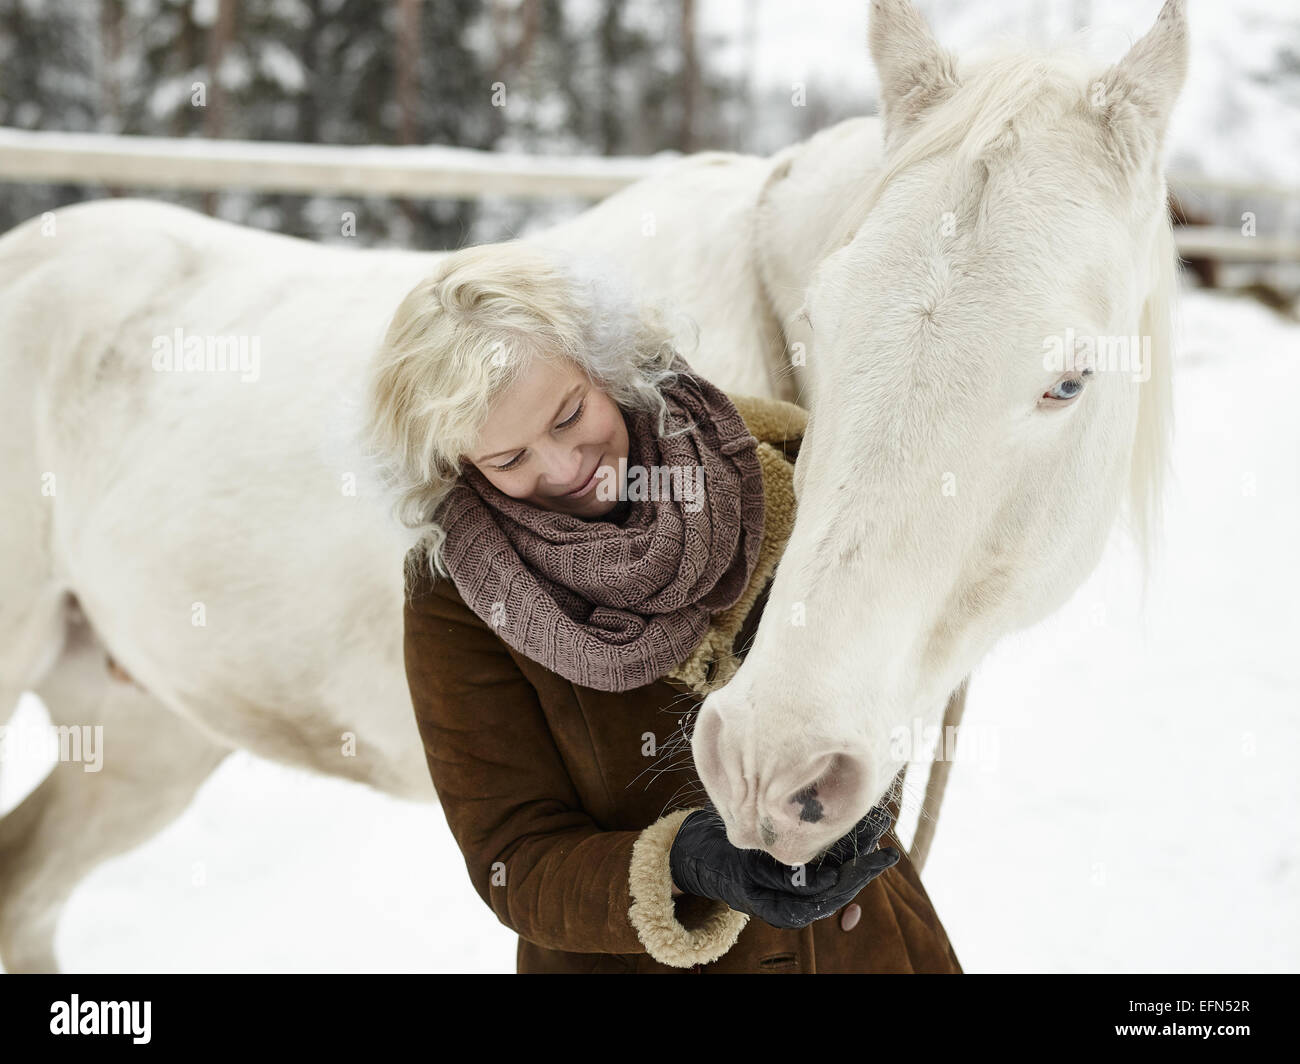 Attractive blond woman feeds a white horse, overcast winter day Stock Photo